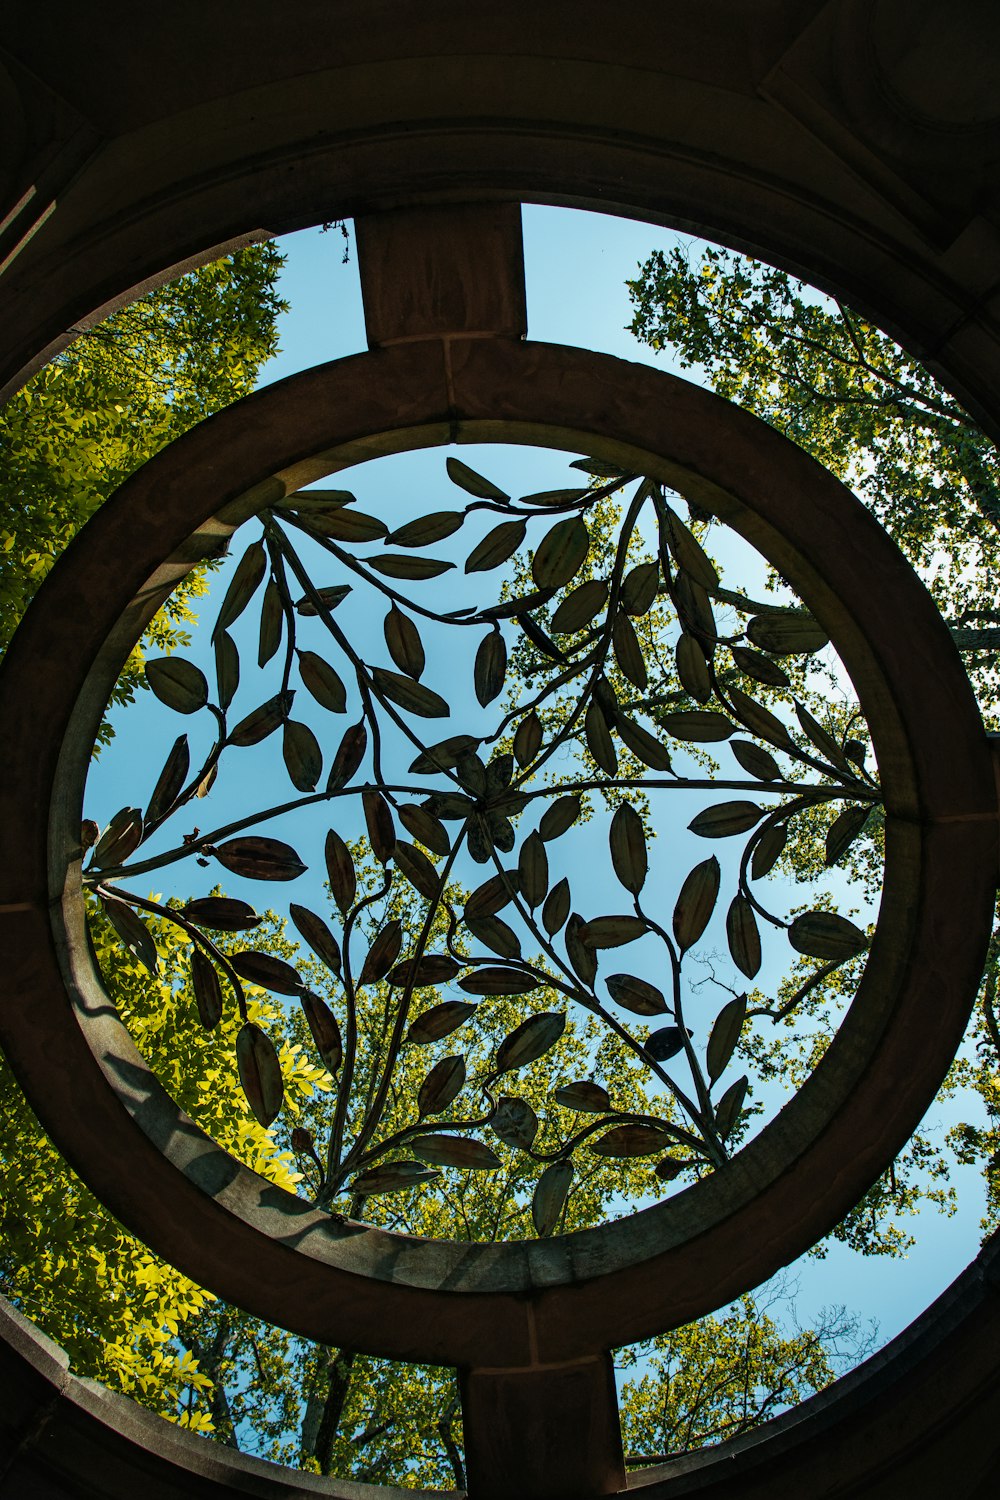 a circular window with a view of trees through it